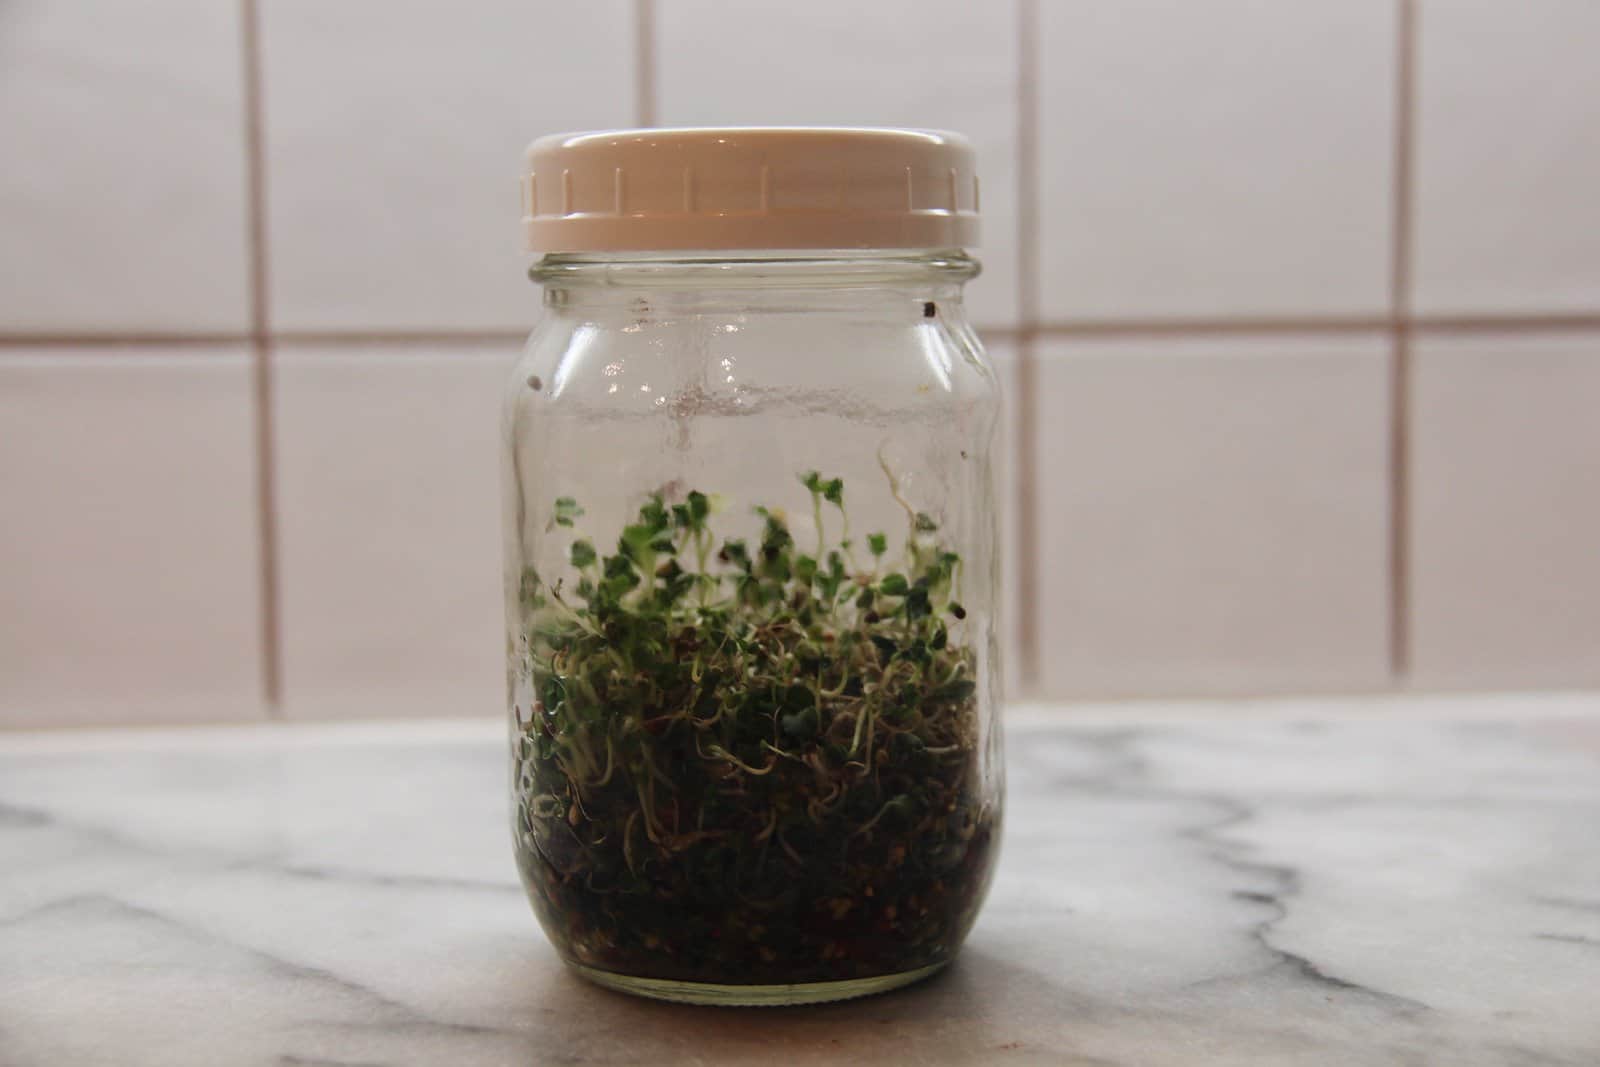 Mason jar with broccoli sprouts growing in it